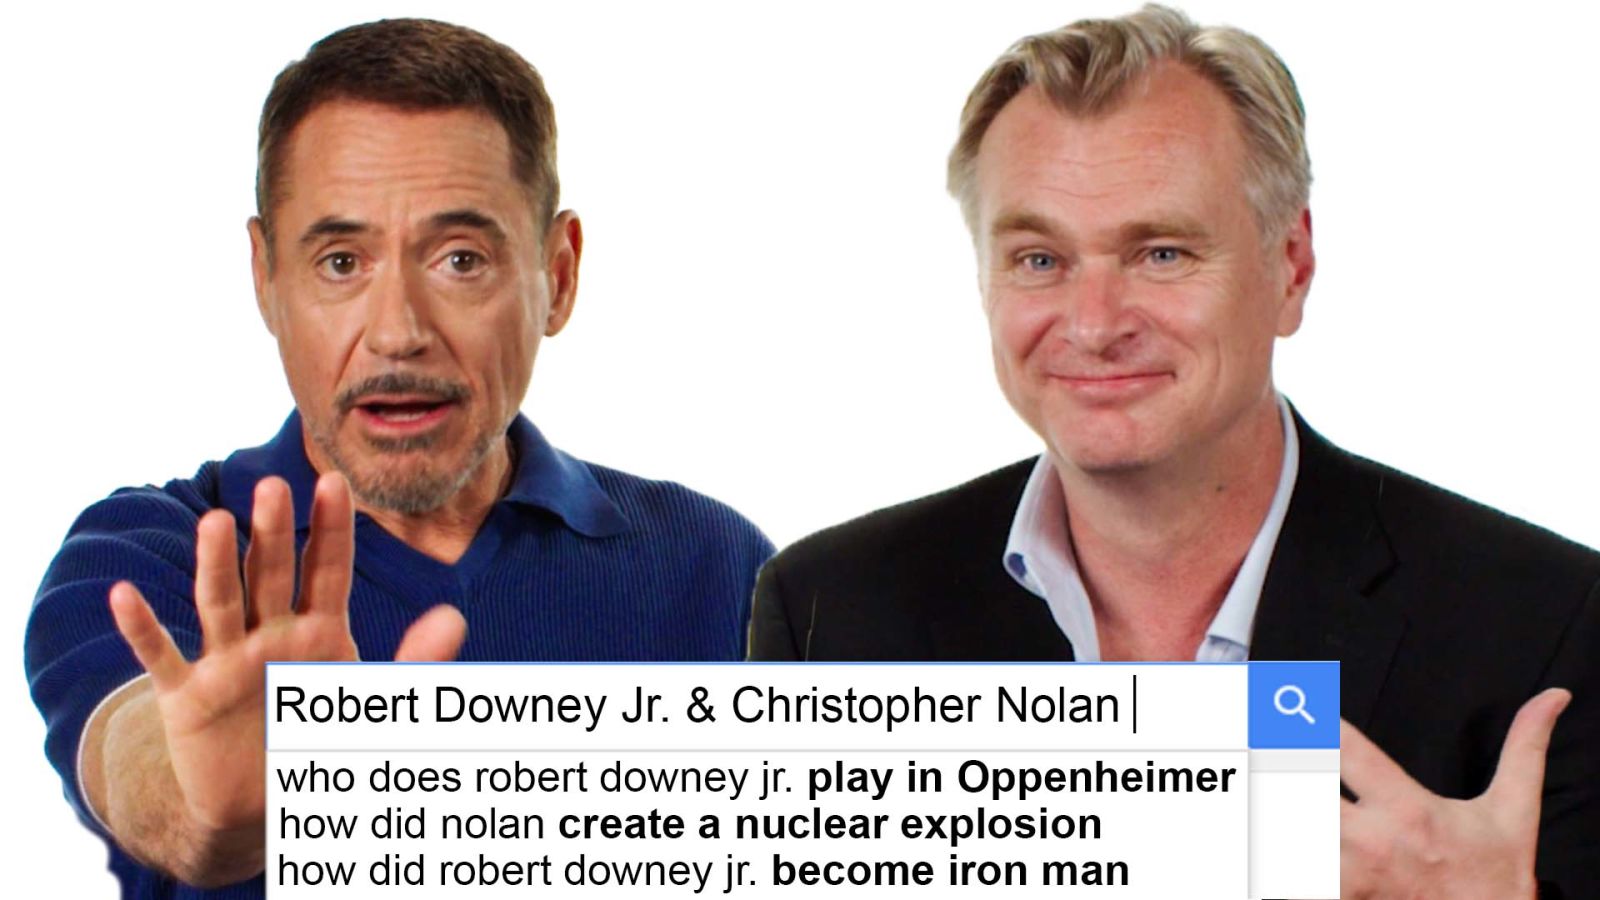 Robert Downey Jr. & Christopher Nolan Answer The Web's Most Searched Questions